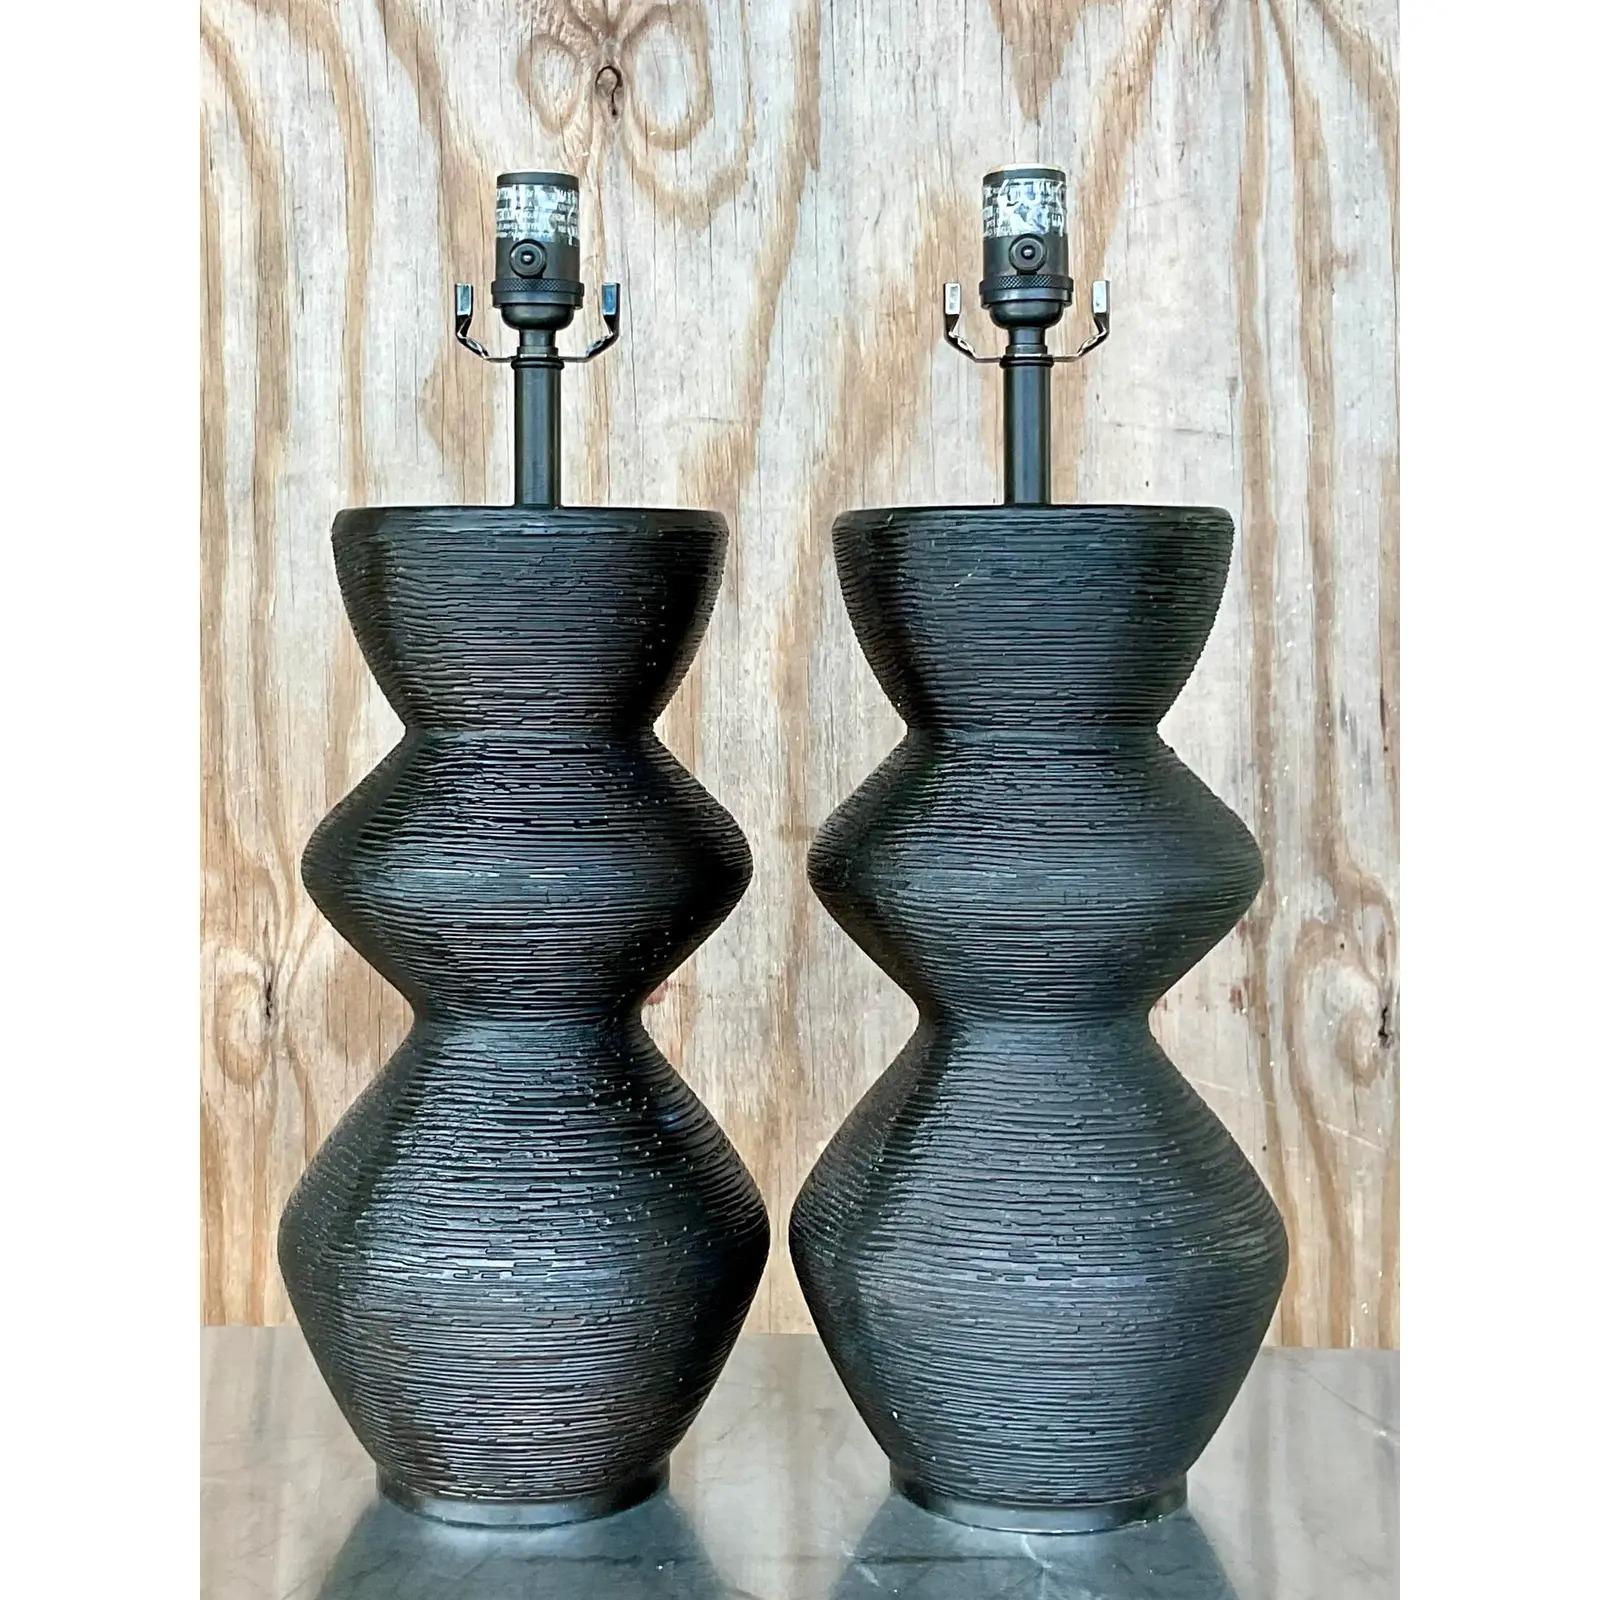 A fantastic pair of vintage Contemporary Utopia table lamps. Made by the iconic Kelly Wearstler for Visual Comfort. A chic zig zag design in a deep black. A great textured surface. Acquired from a Palm Beach estate.